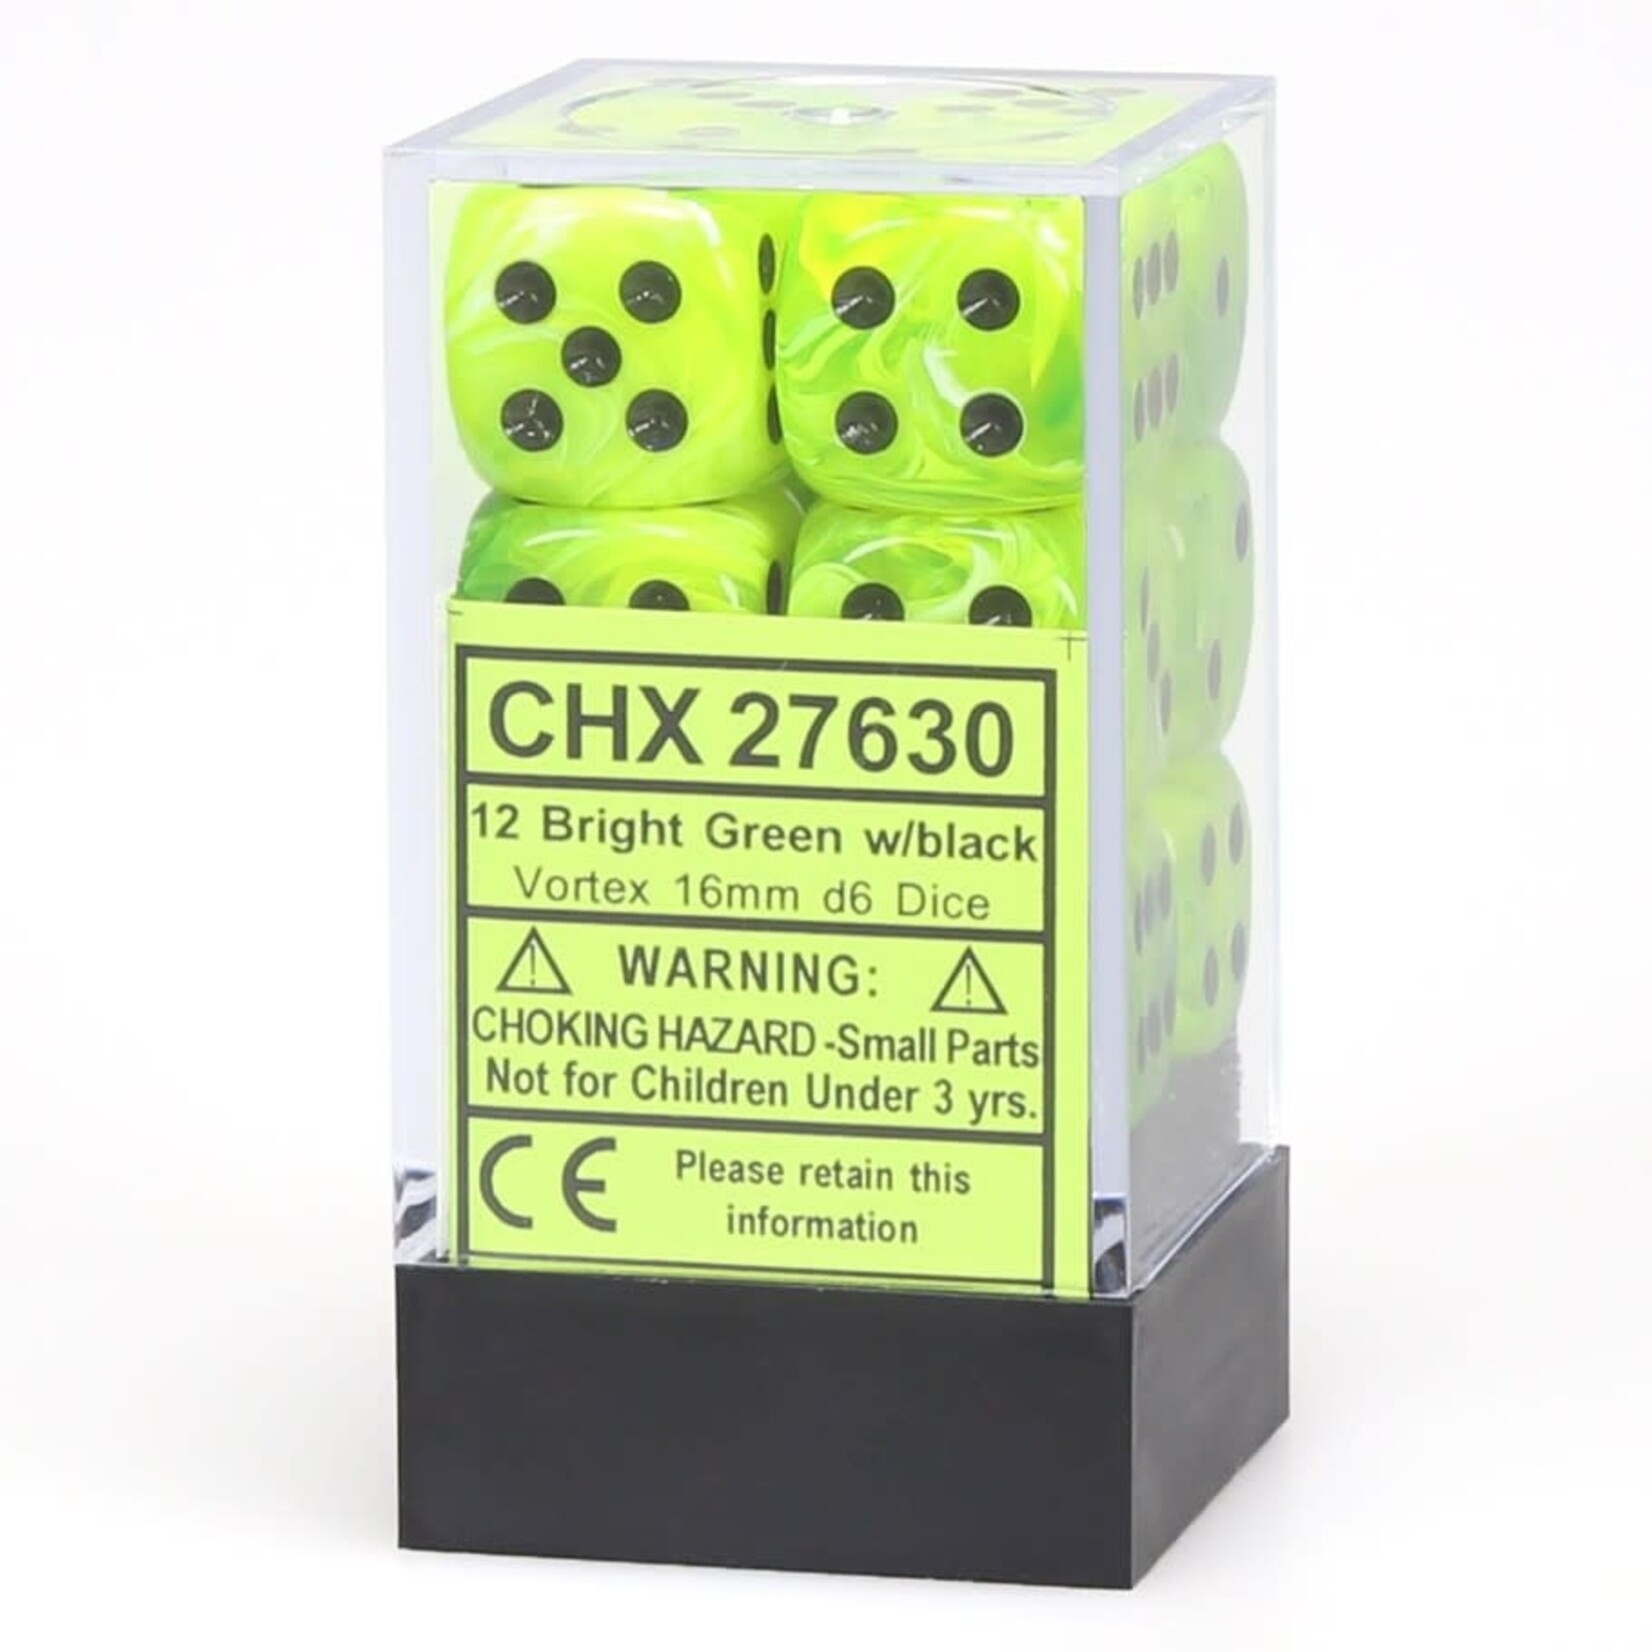 Chessex Cube of 12 D6 Dice Vortex Bright Green with black pips